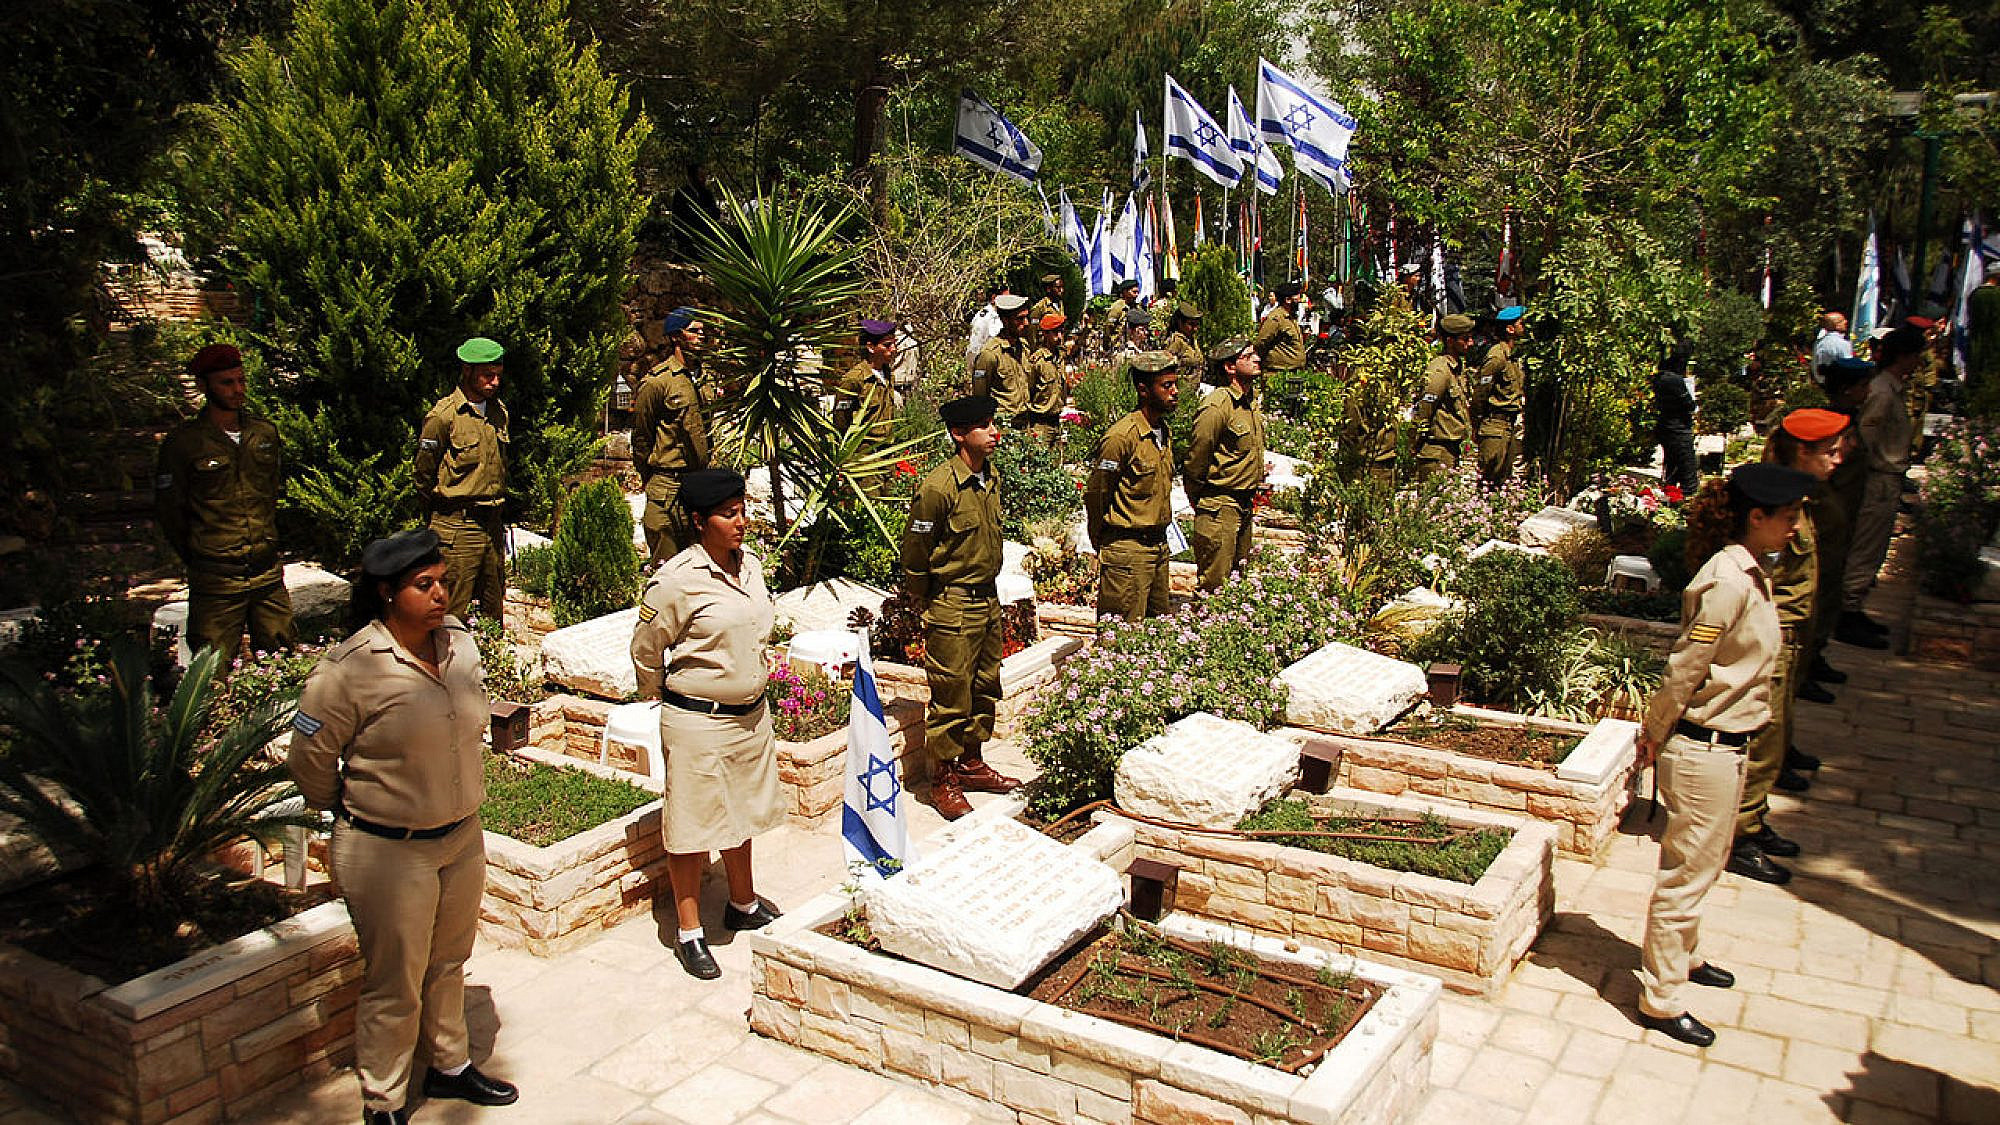 Israeli soldiers at a ceremony on Mount Herzl in Jerusalem. Credit: Wikimedia Commons.